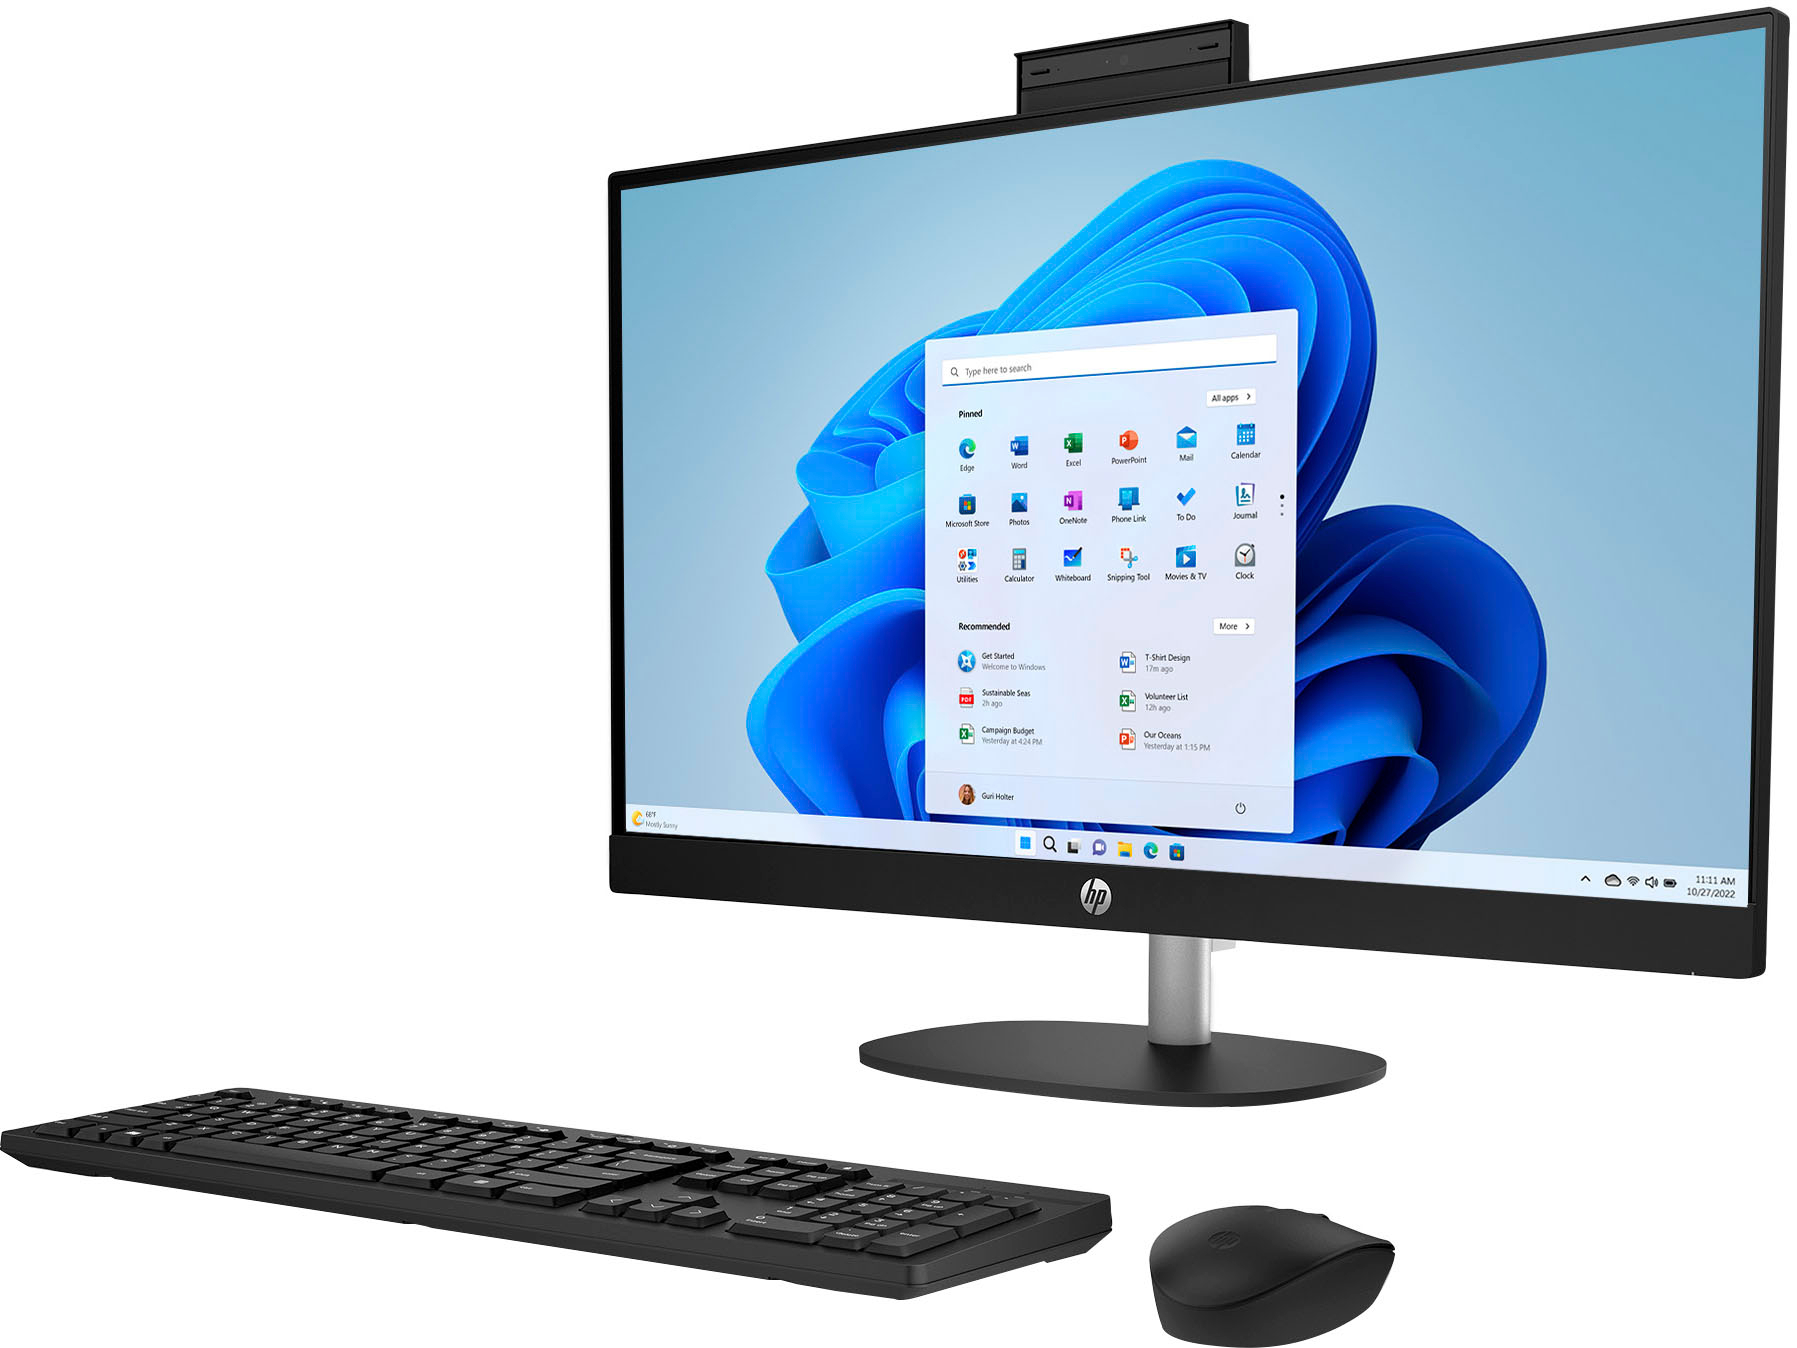 Angle View: HP - 27" Touch-Screen All-in-One with Adjustable Height - AMD Ryzen 7 - 16GB Memory - 1TB SSD - Jet Black